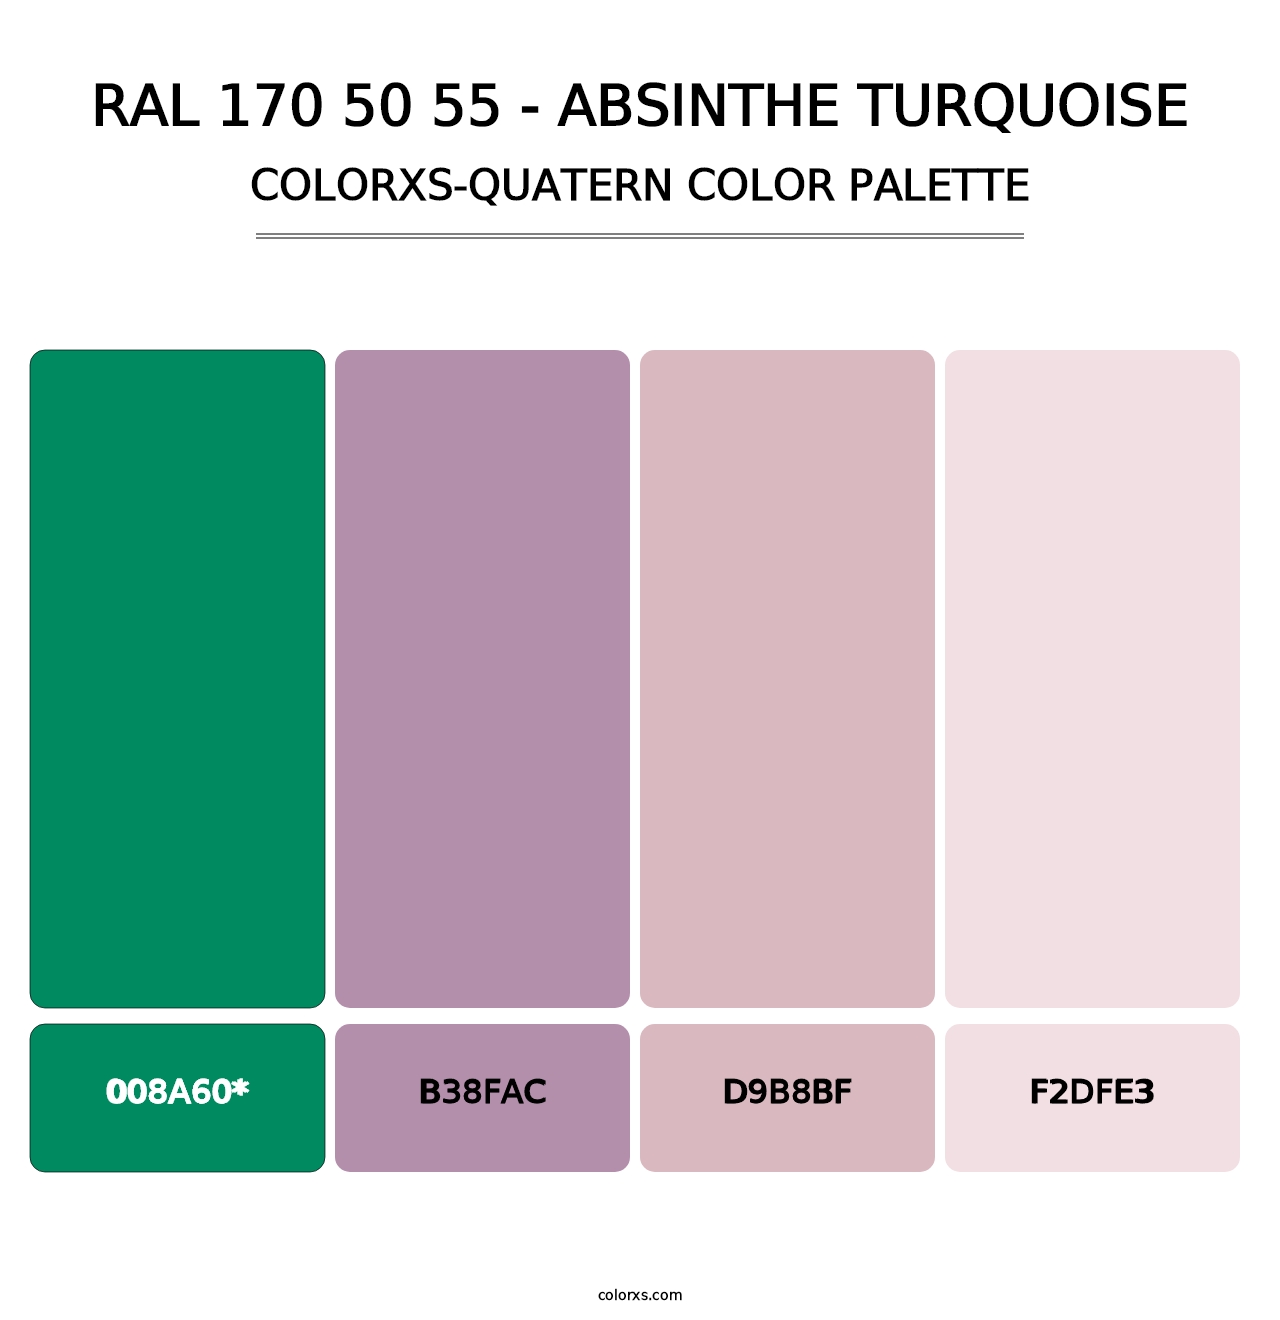 RAL 170 50 55 - Absinthe Turquoise - Colorxs Quatern Palette